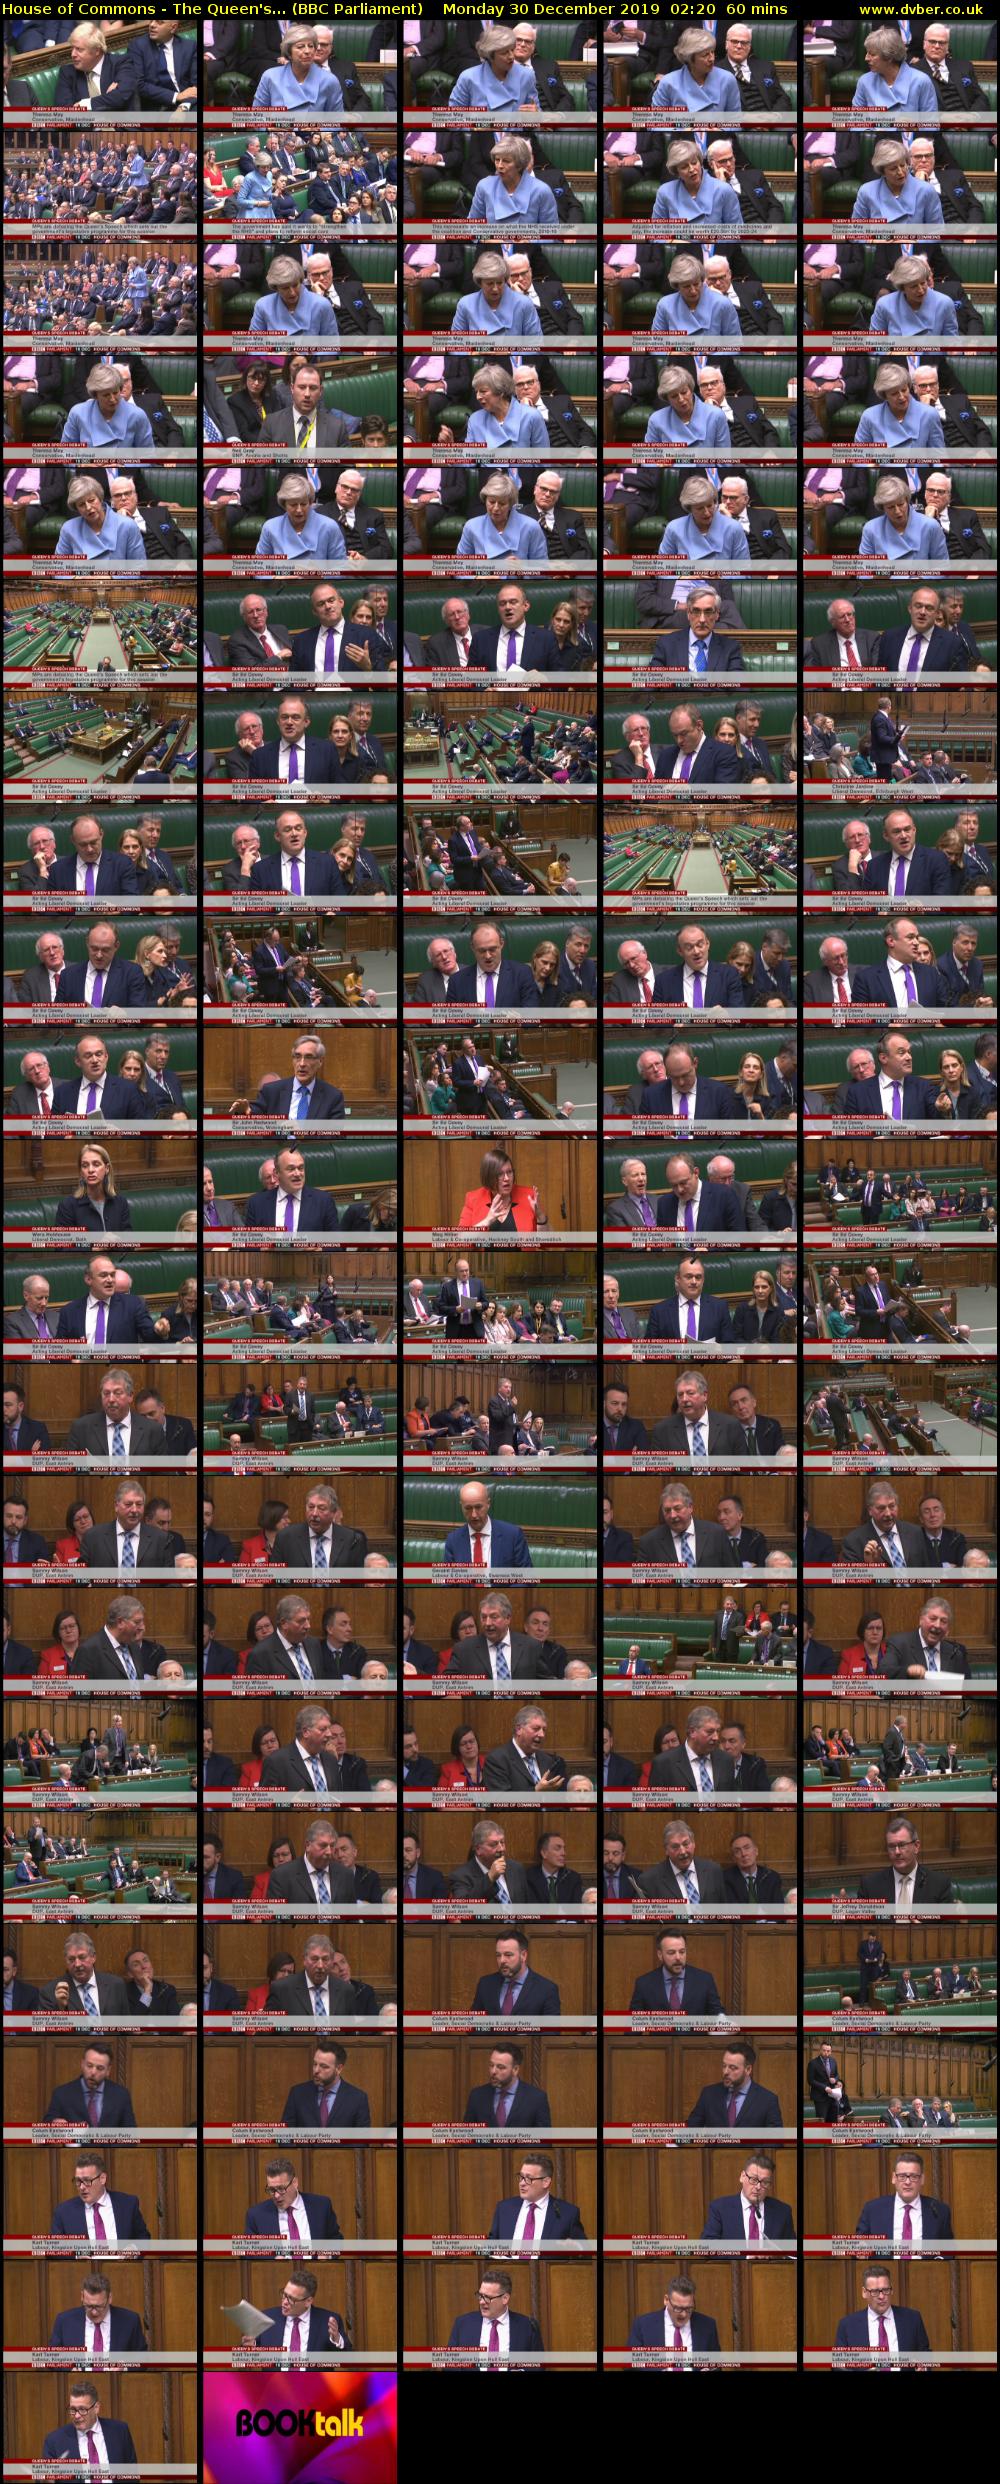 House of Commons - The Queen's... (BBC Parliament) Monday 30 December 2019 02:20 - 03:20